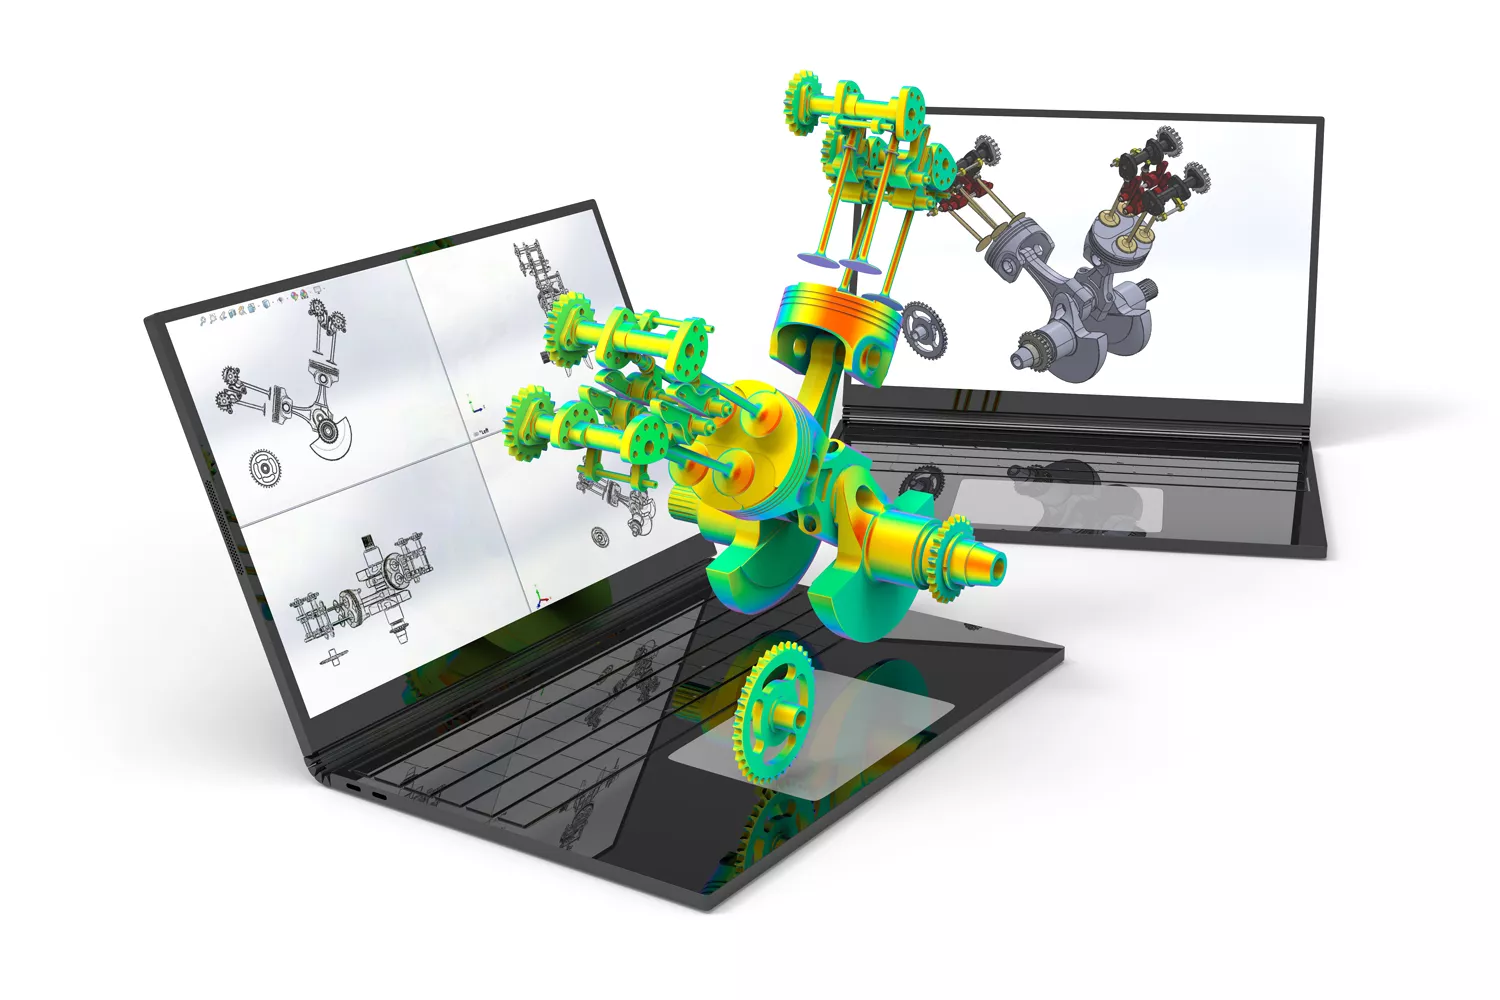 Buy One, Get One FREE on SOLIDWORKS Simulation for Limited Time.